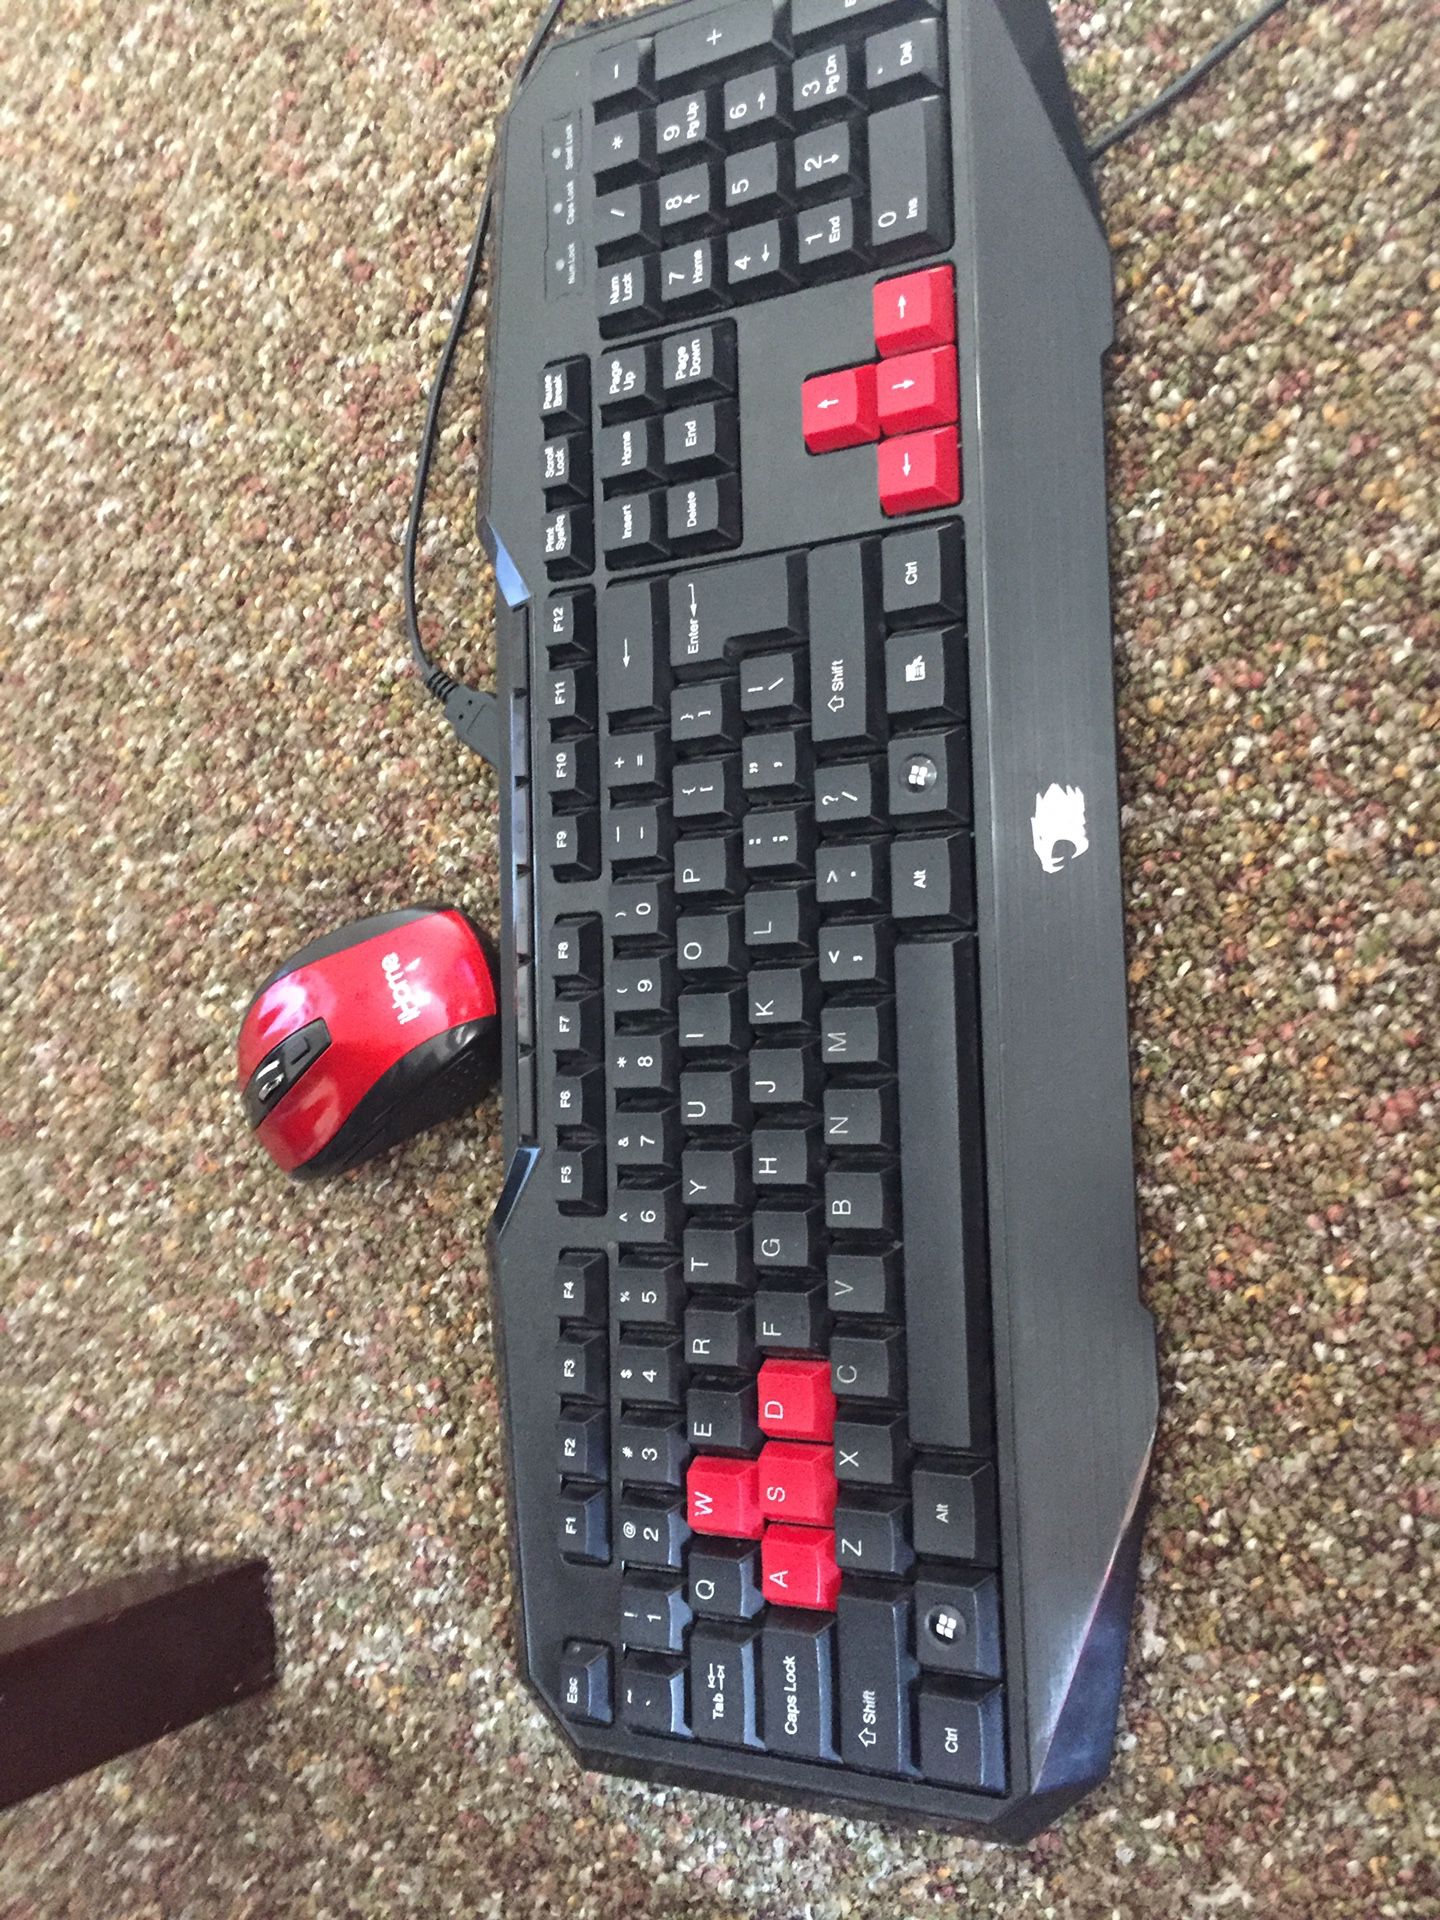 Ibuypower gaming keyboard with mouse